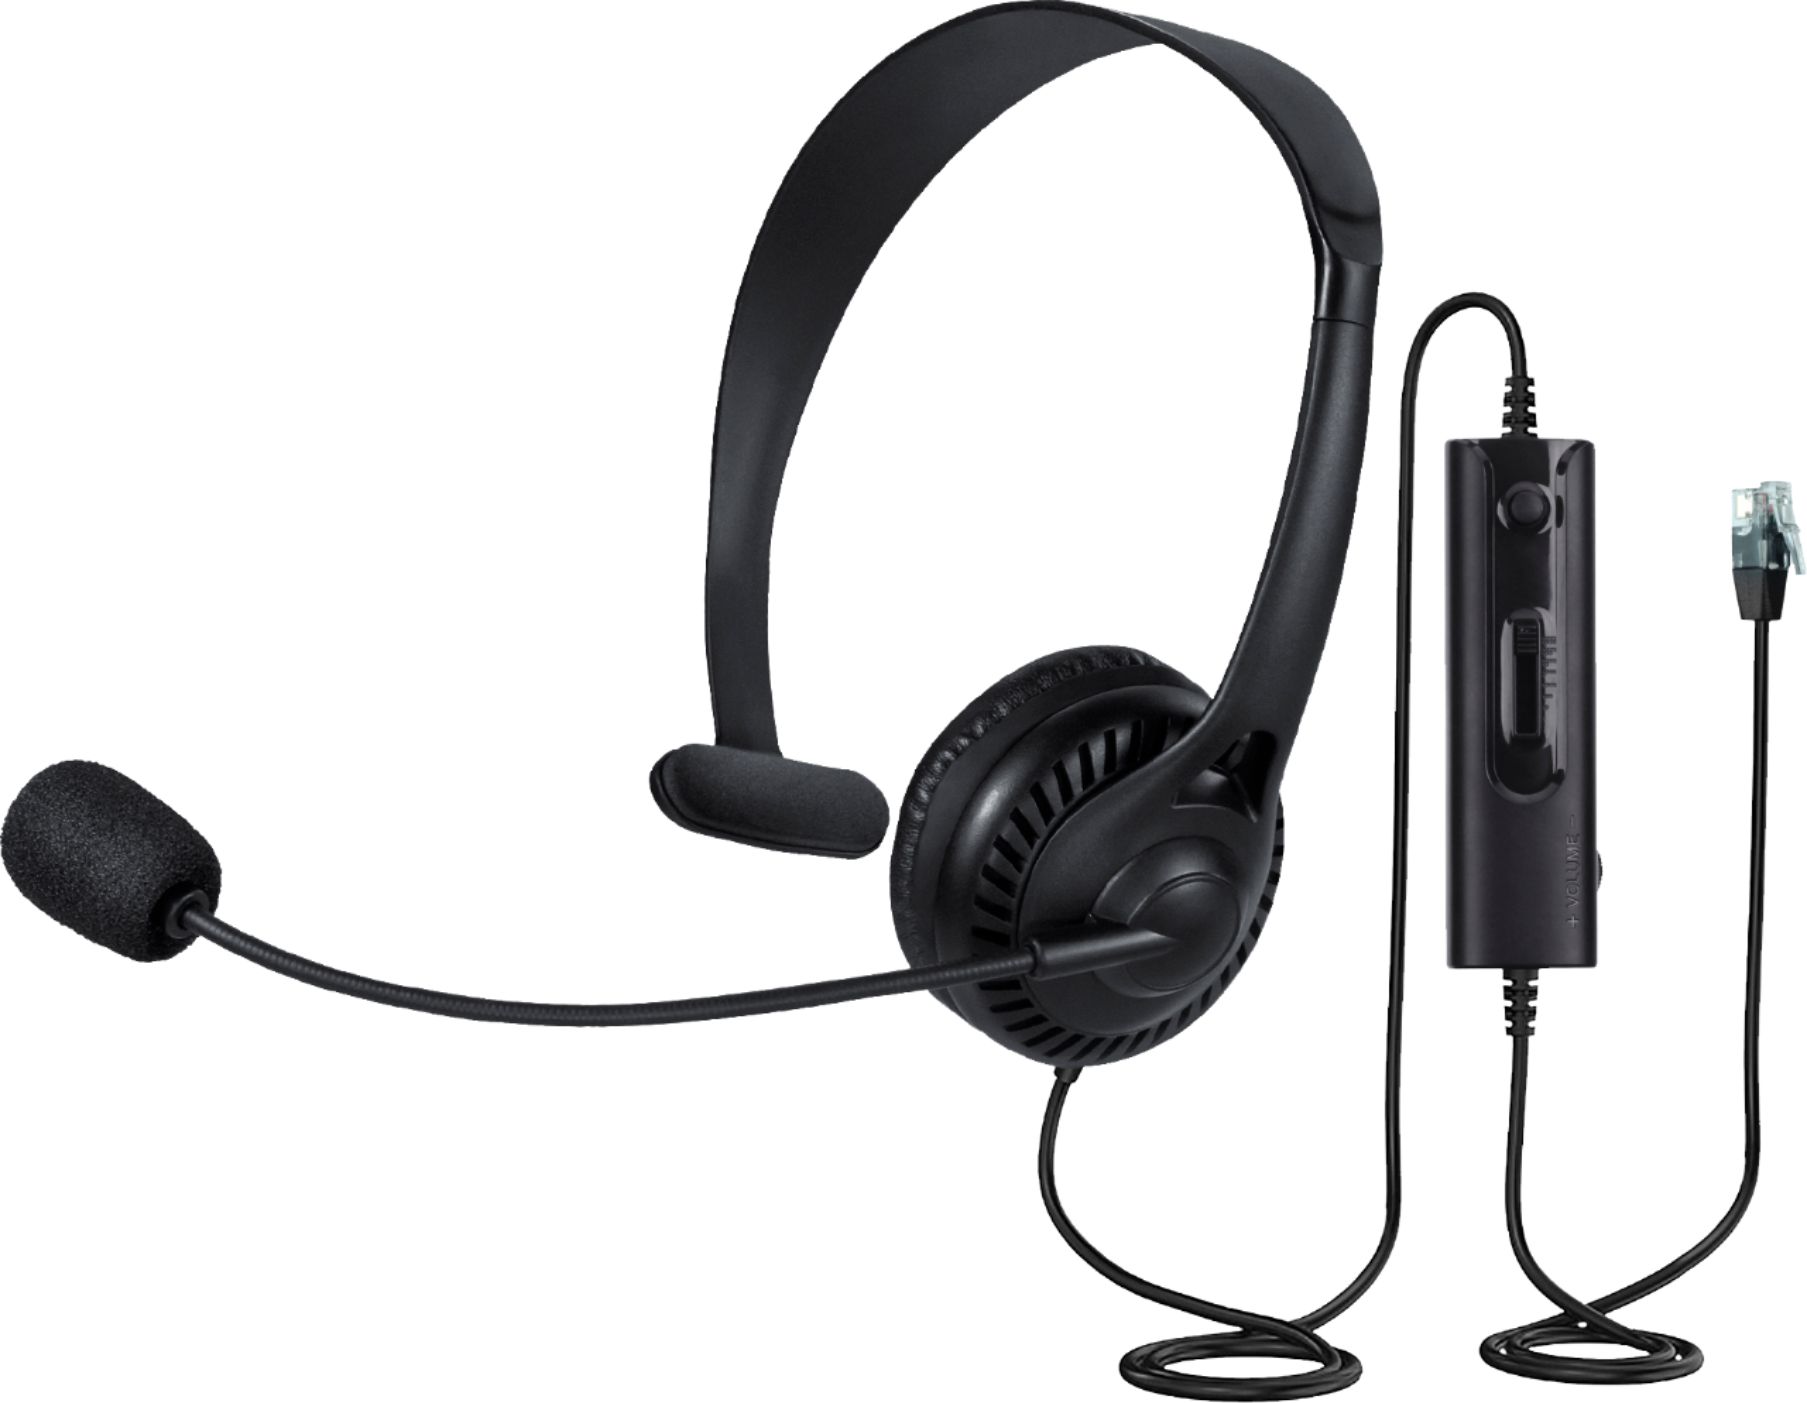 Angle View: Insignia™ - Landline Hands-Free Headset with RJ-9 Connection - Black